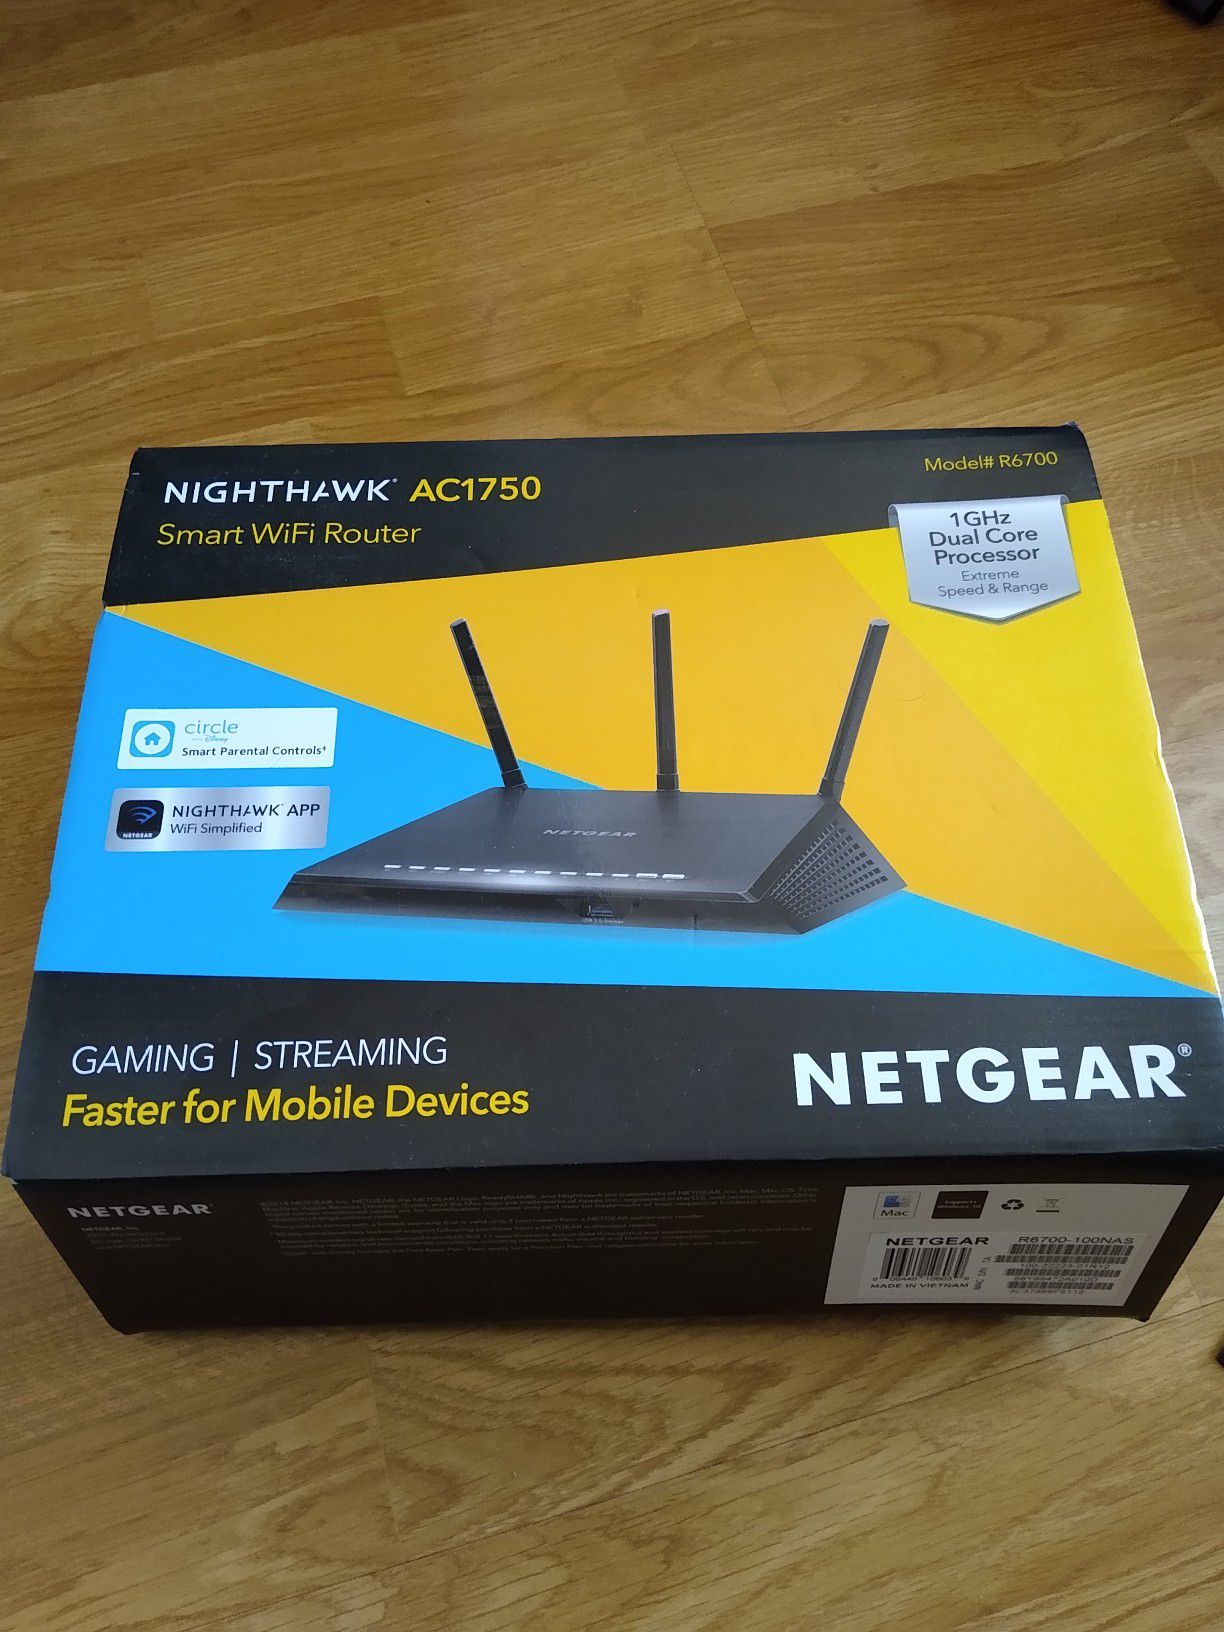 Netgear R6700 Gaming WiFi Router